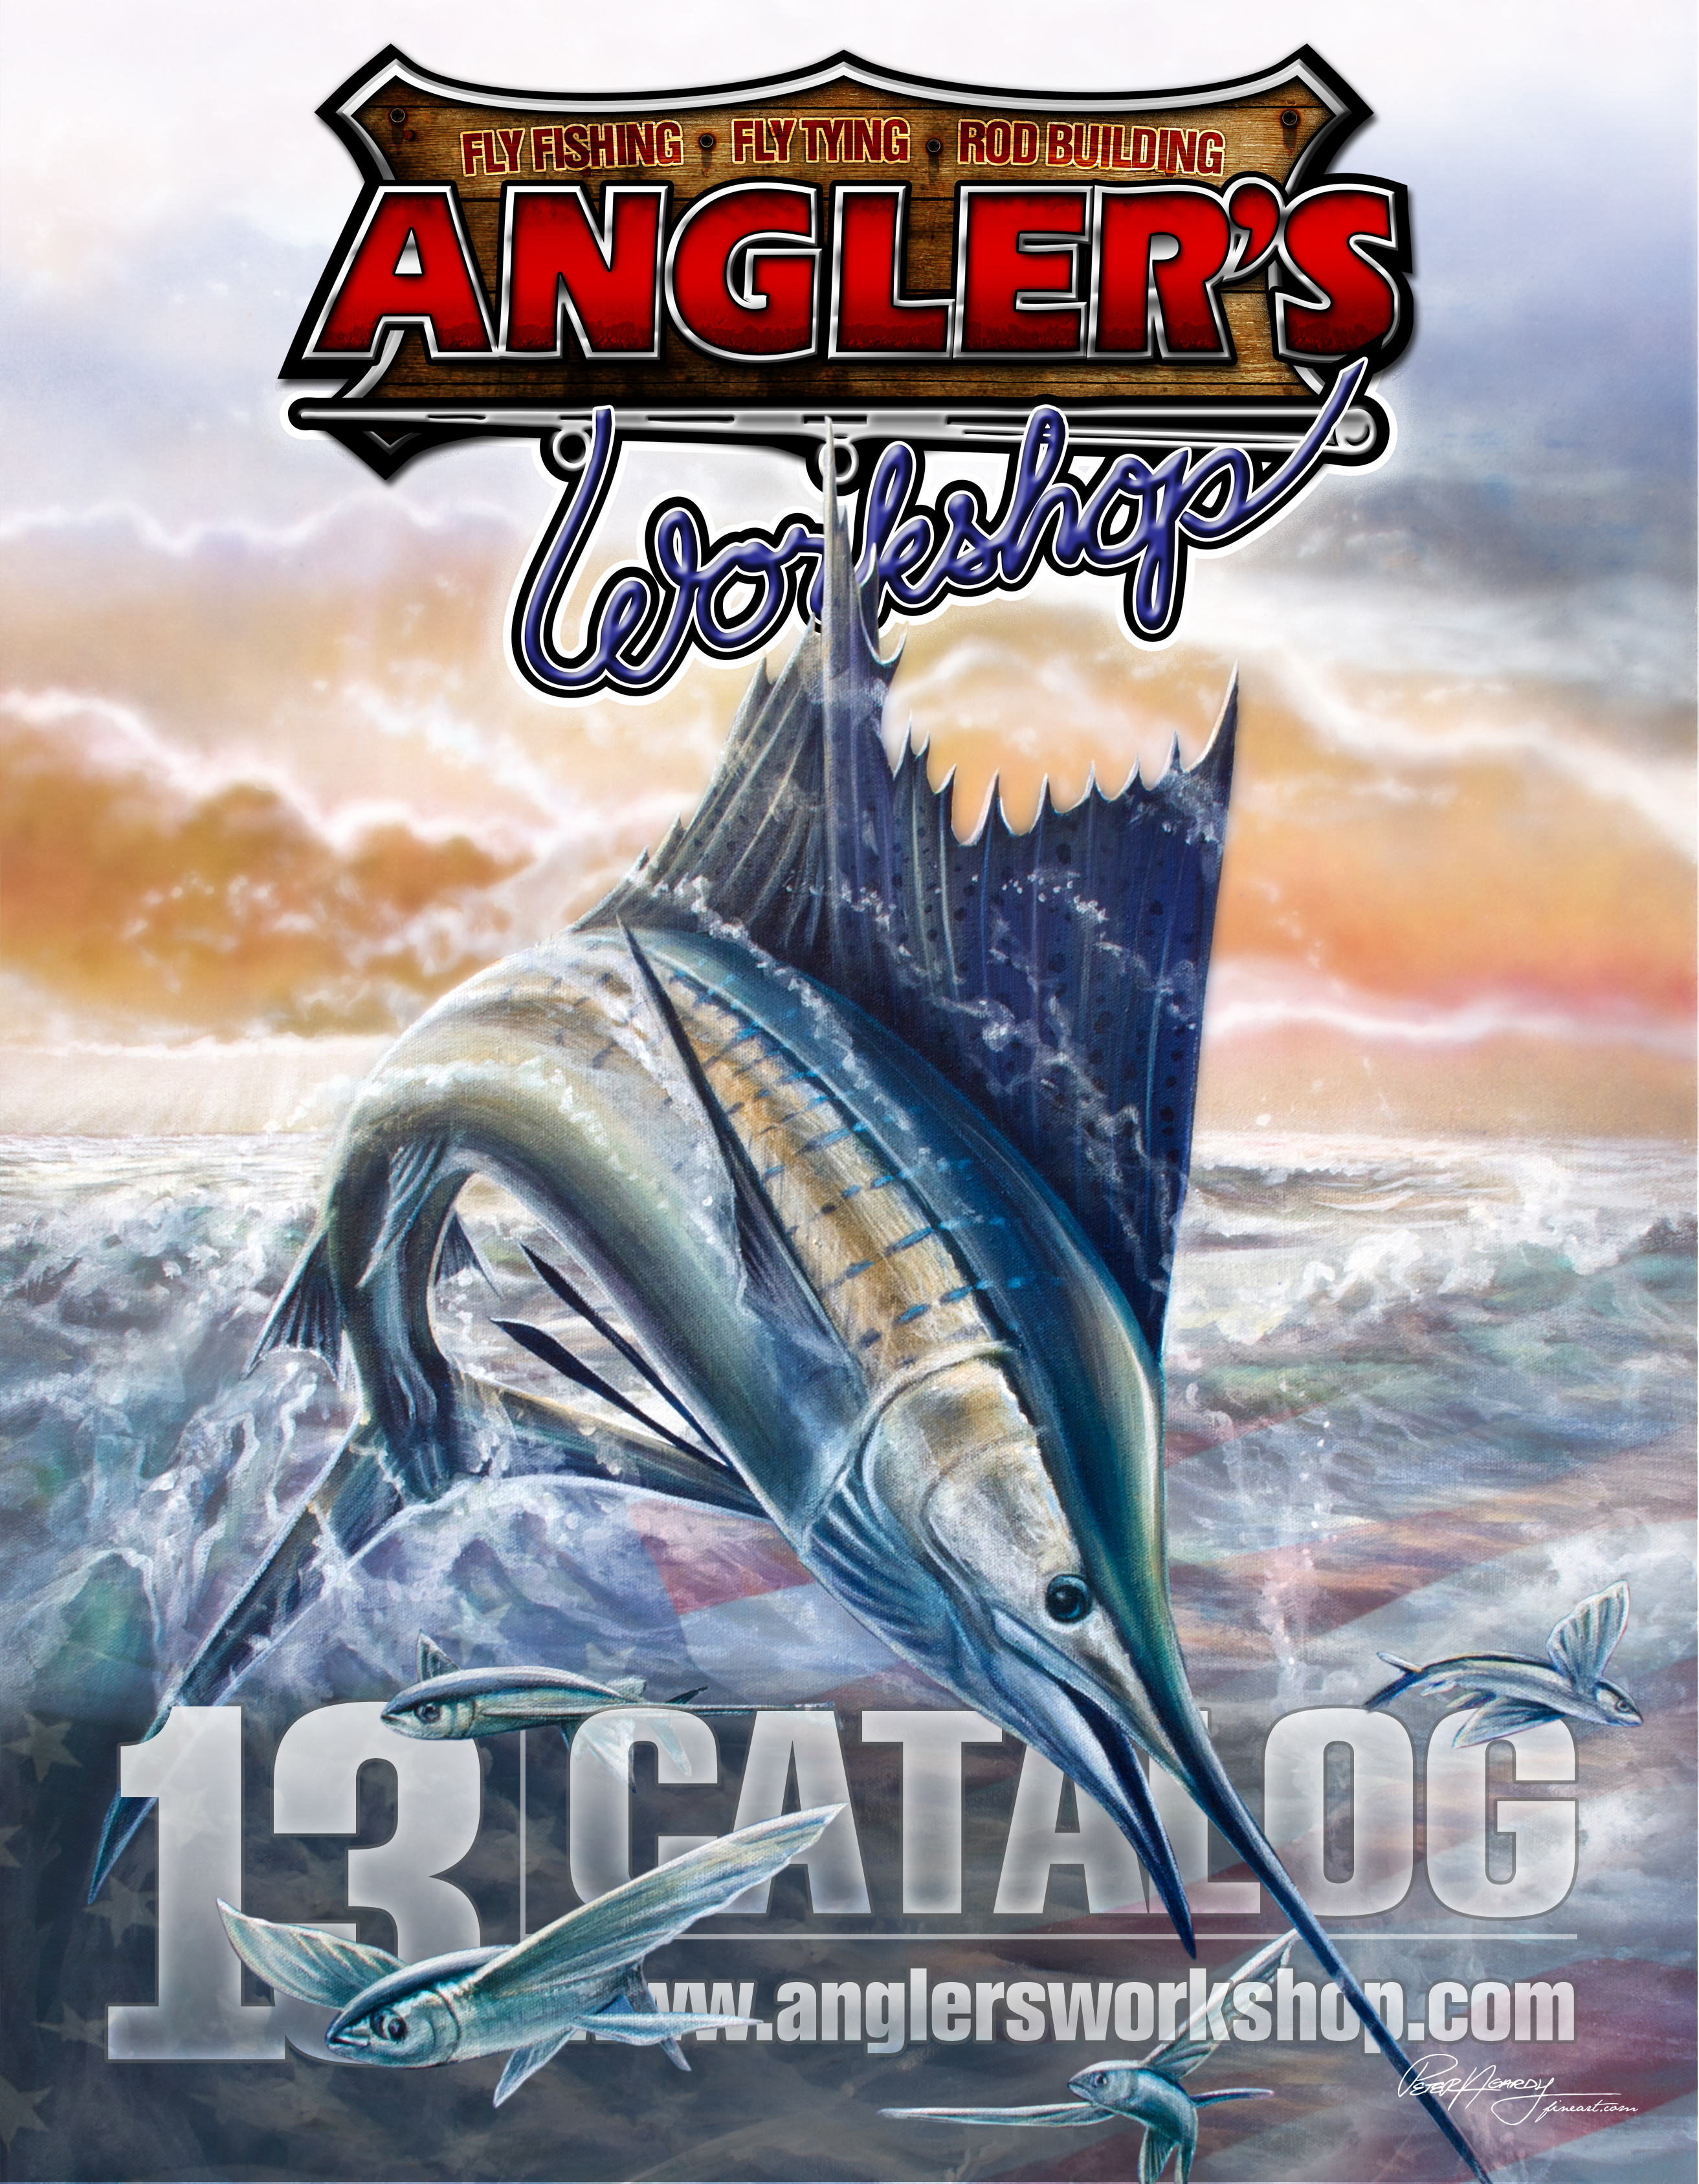 New Covers for 'Angler's Workshop' catalogue